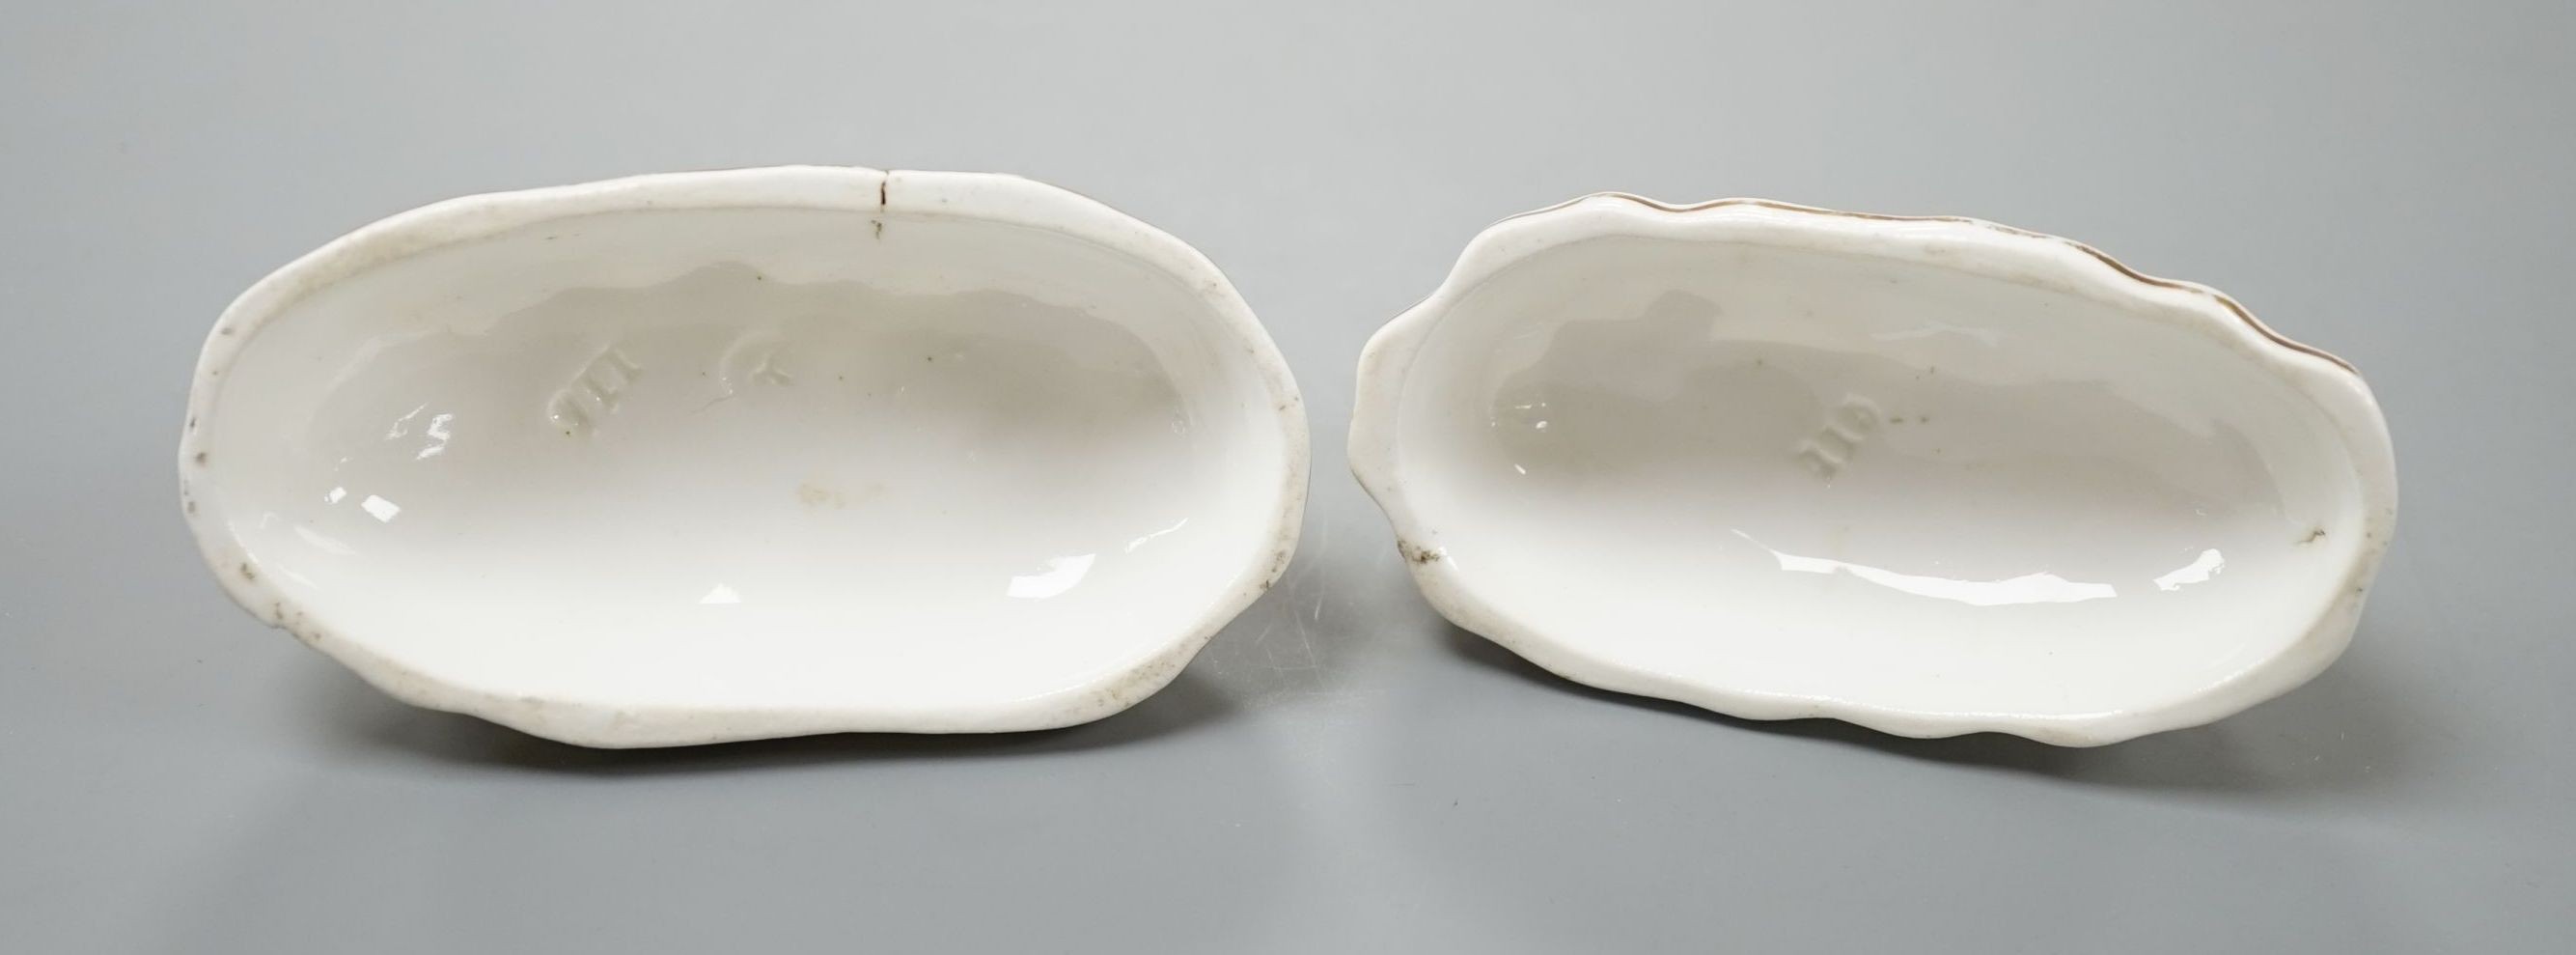 A rare pair of Samuel Alcock porcelain models of recumbent pointers, c.1835–50, impressed mark ‘115’, 8.8 cm long, Unrecorded in Dennis G.Rice Dogs in English porcelain., Provenance: Dennis G.Rice collection